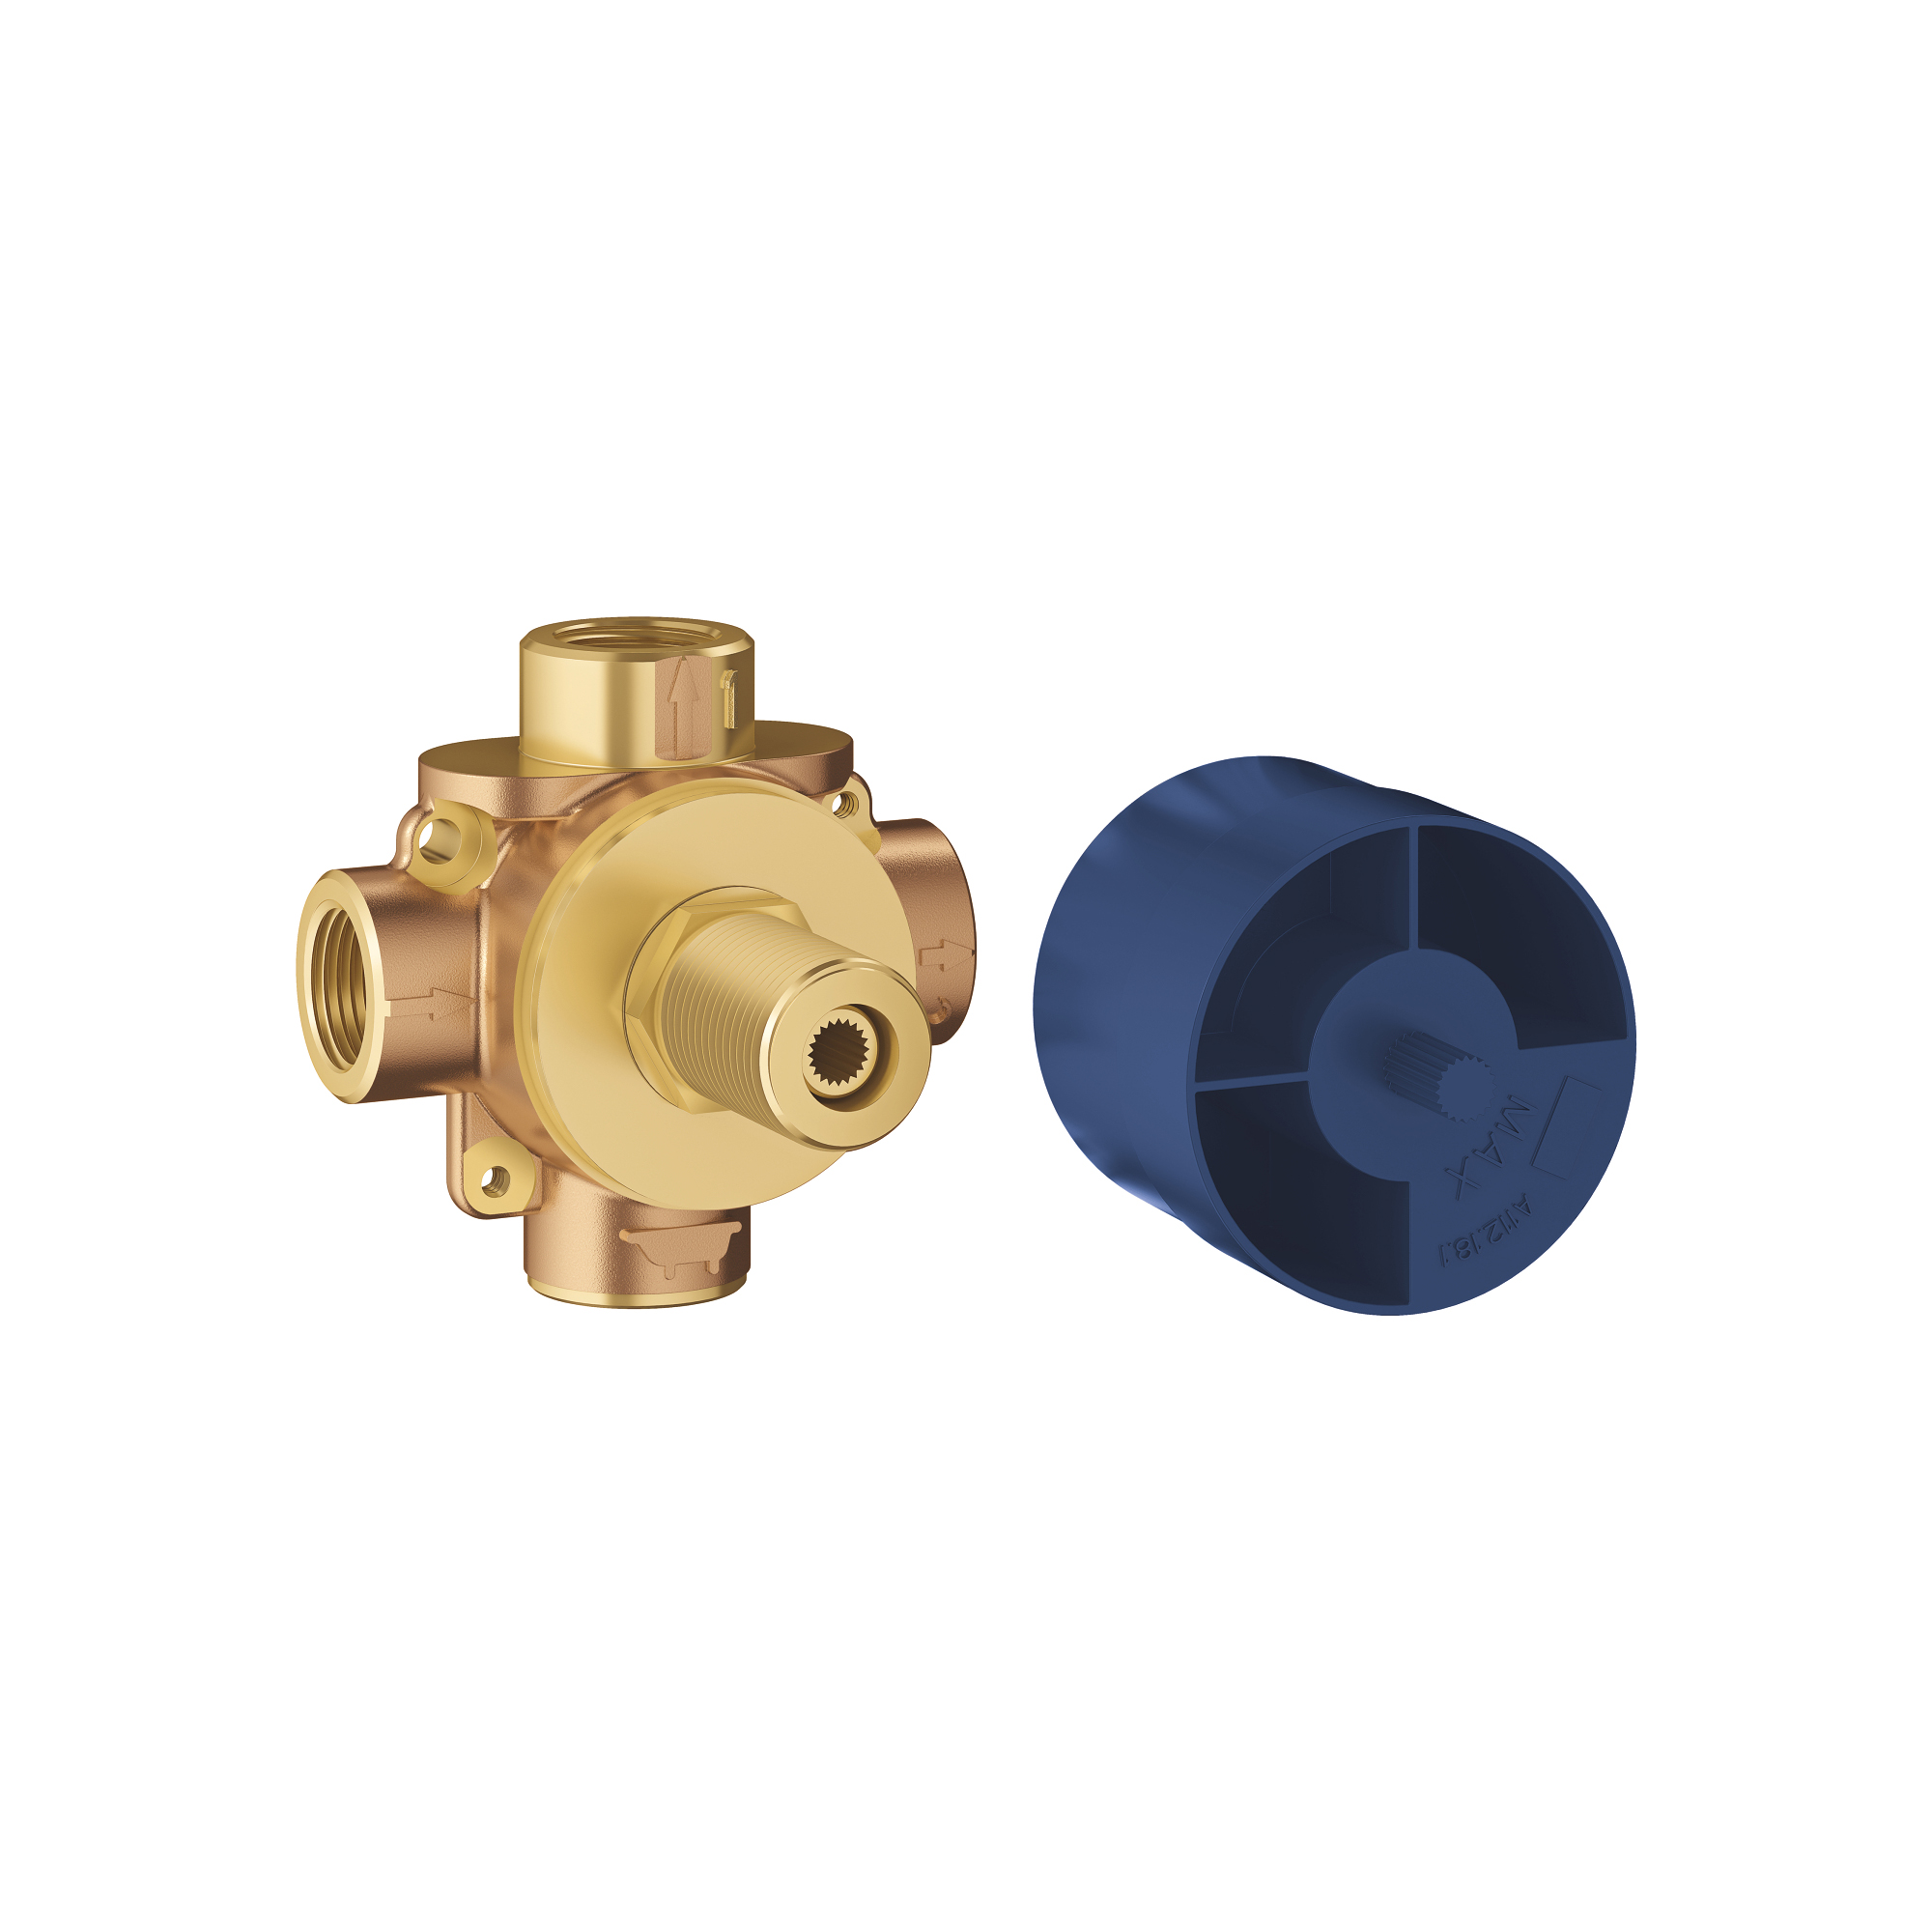 3-Way Diverter Rough-In Valve (Shared Functions)